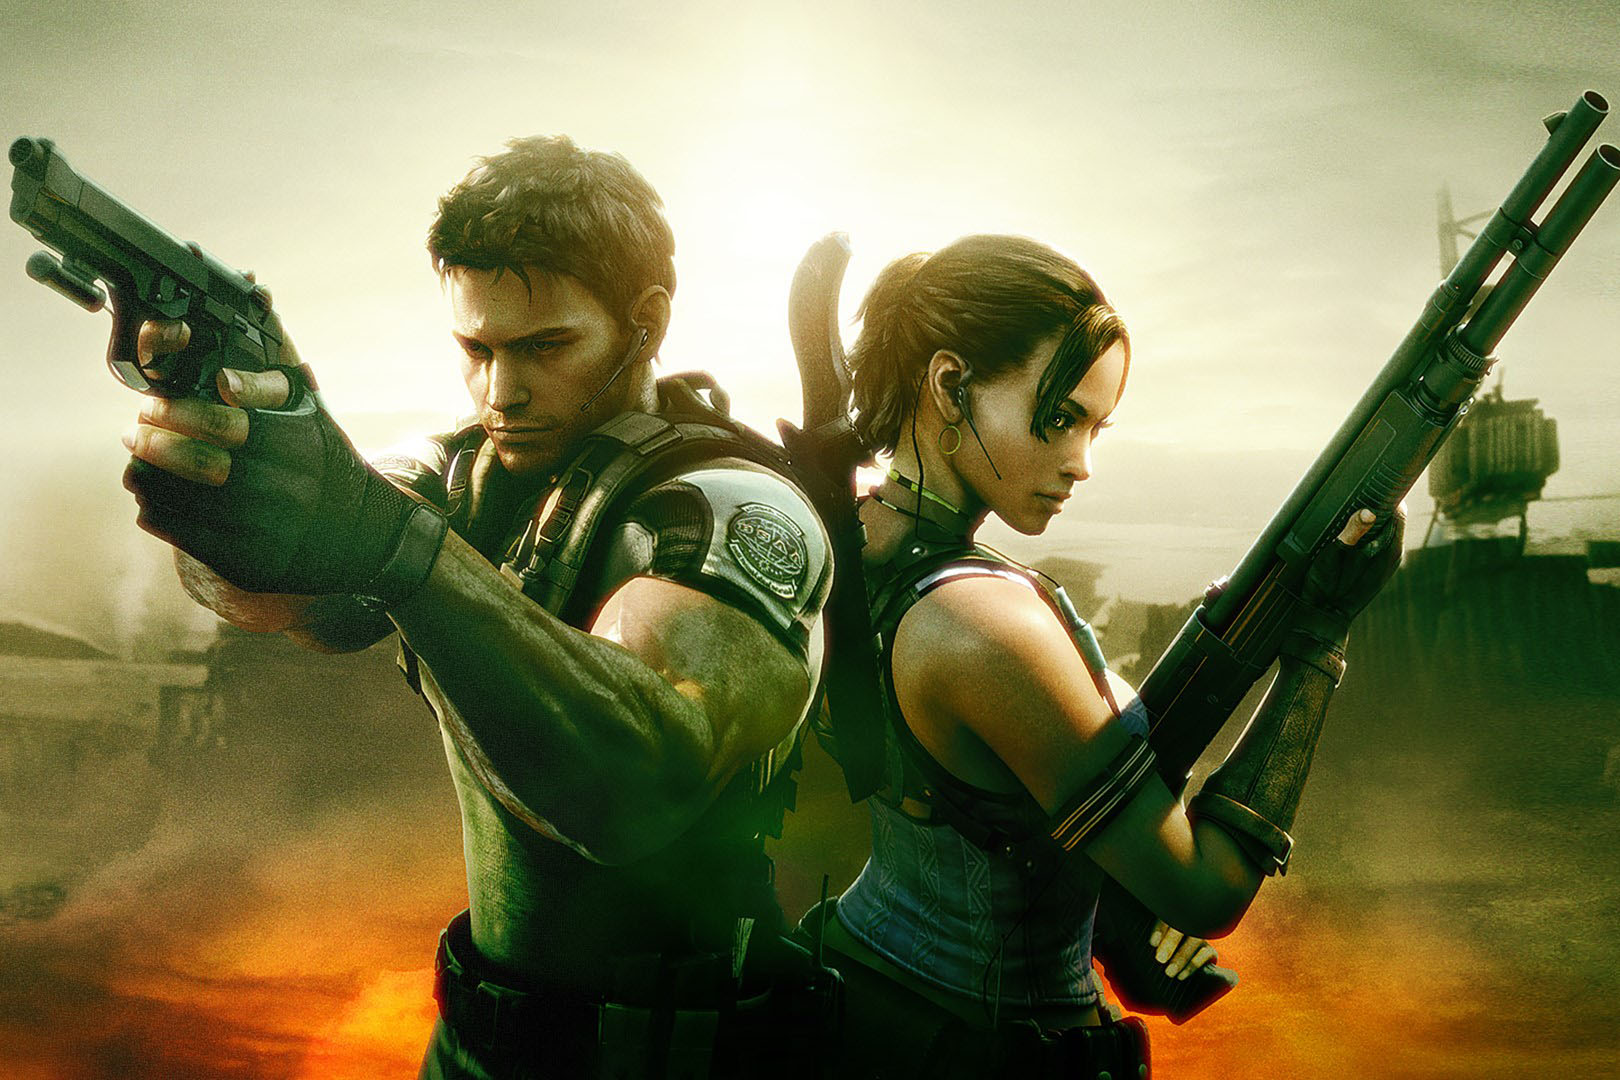 Resident Evil 5: 15 Reasons It's One Of The BEST Games In The Series